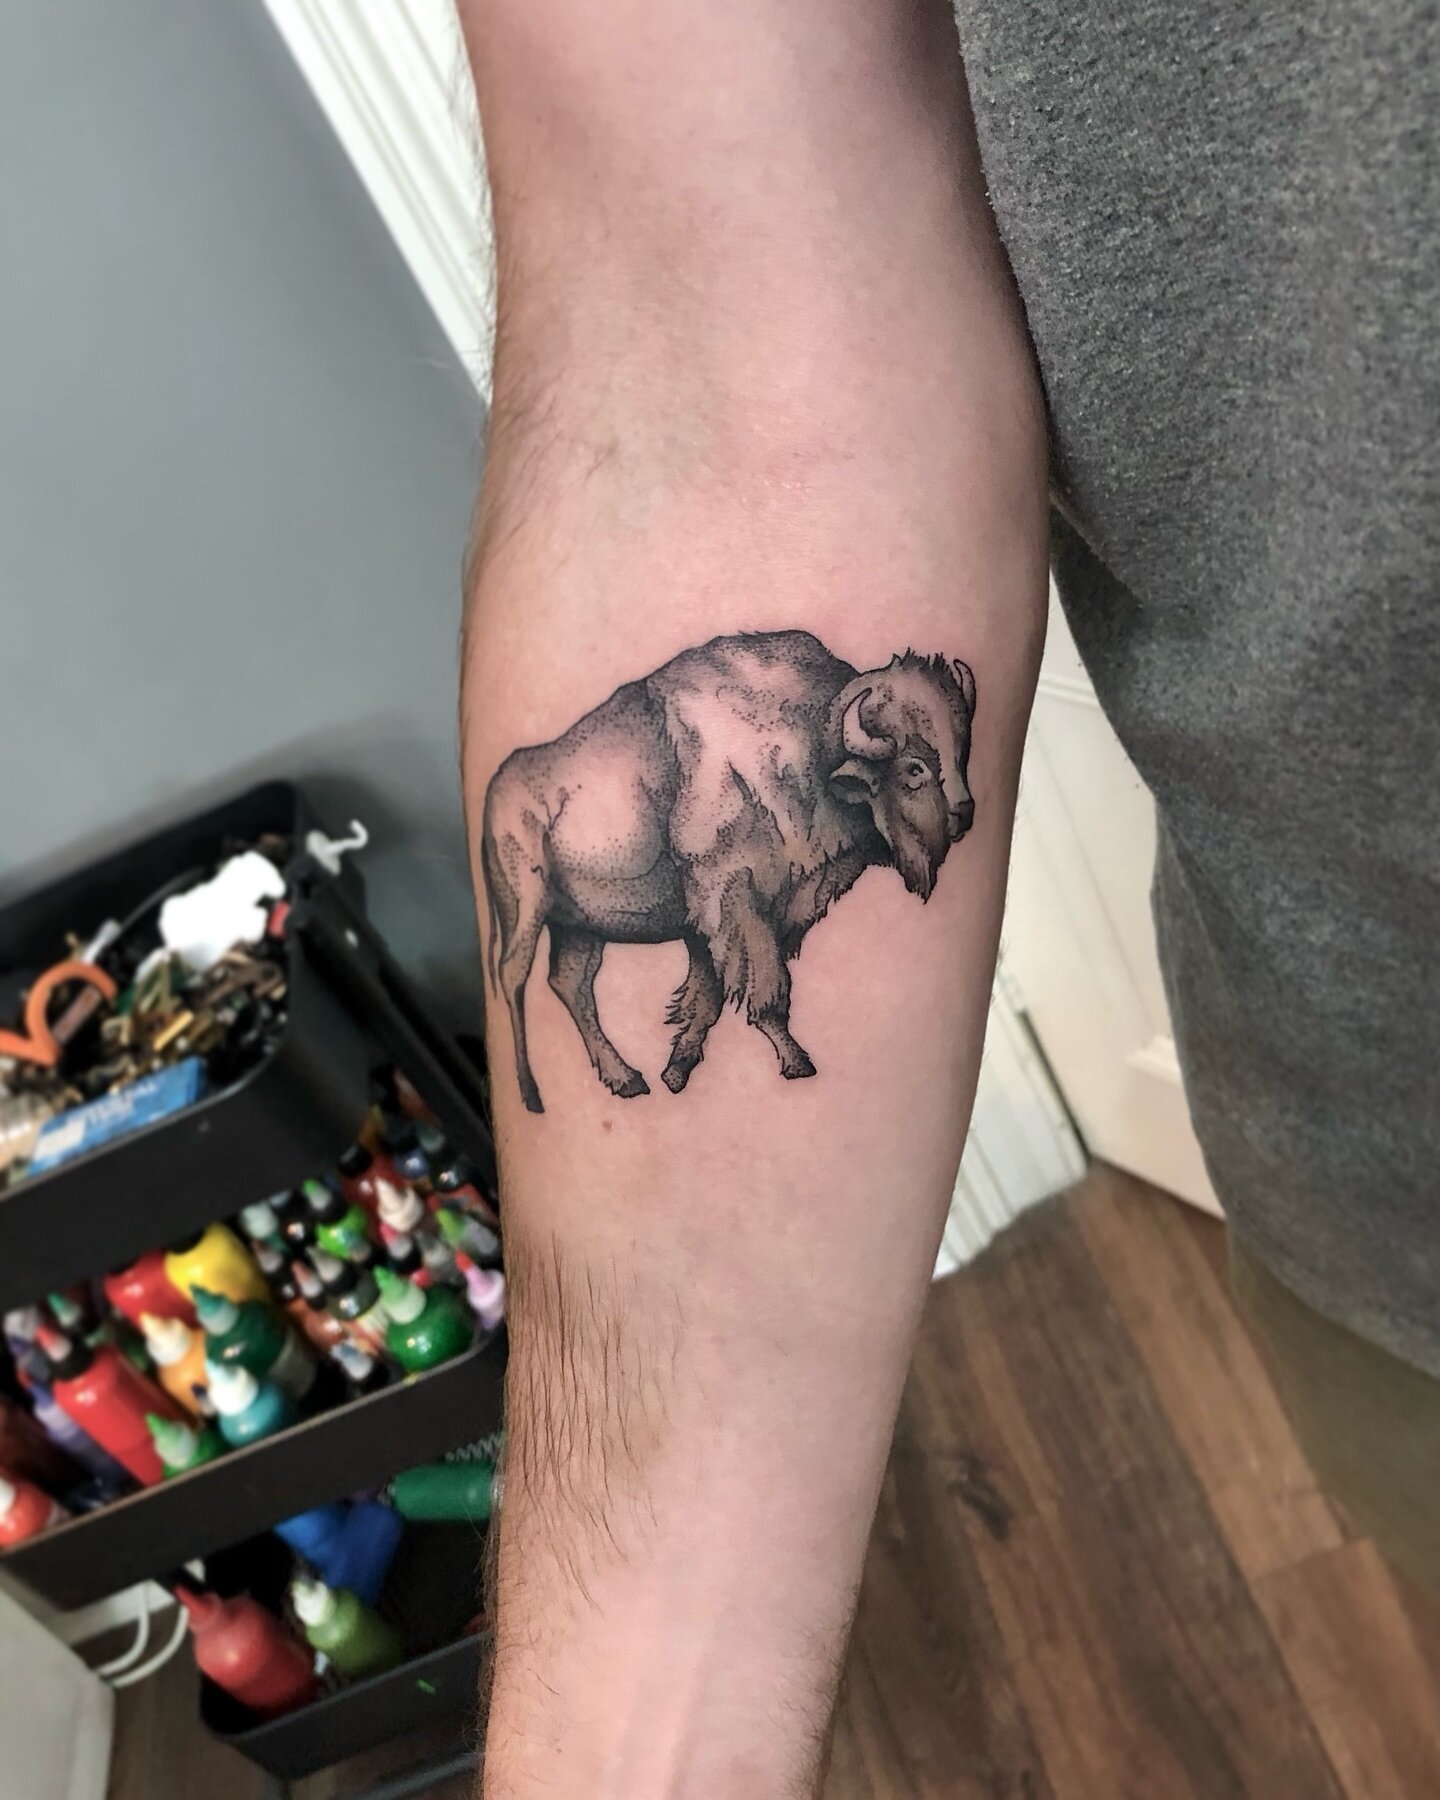 An illustrative bison for Ken this week - great to see you again! Done at @greystreettattoo 

For bookings/enquiries send me a DM or email: s.amaterstein@gmail.com

.
.
.
.
.
#amatersteinart #greystreettattoo #greystreet #stkilda #stkildatattoo #melb